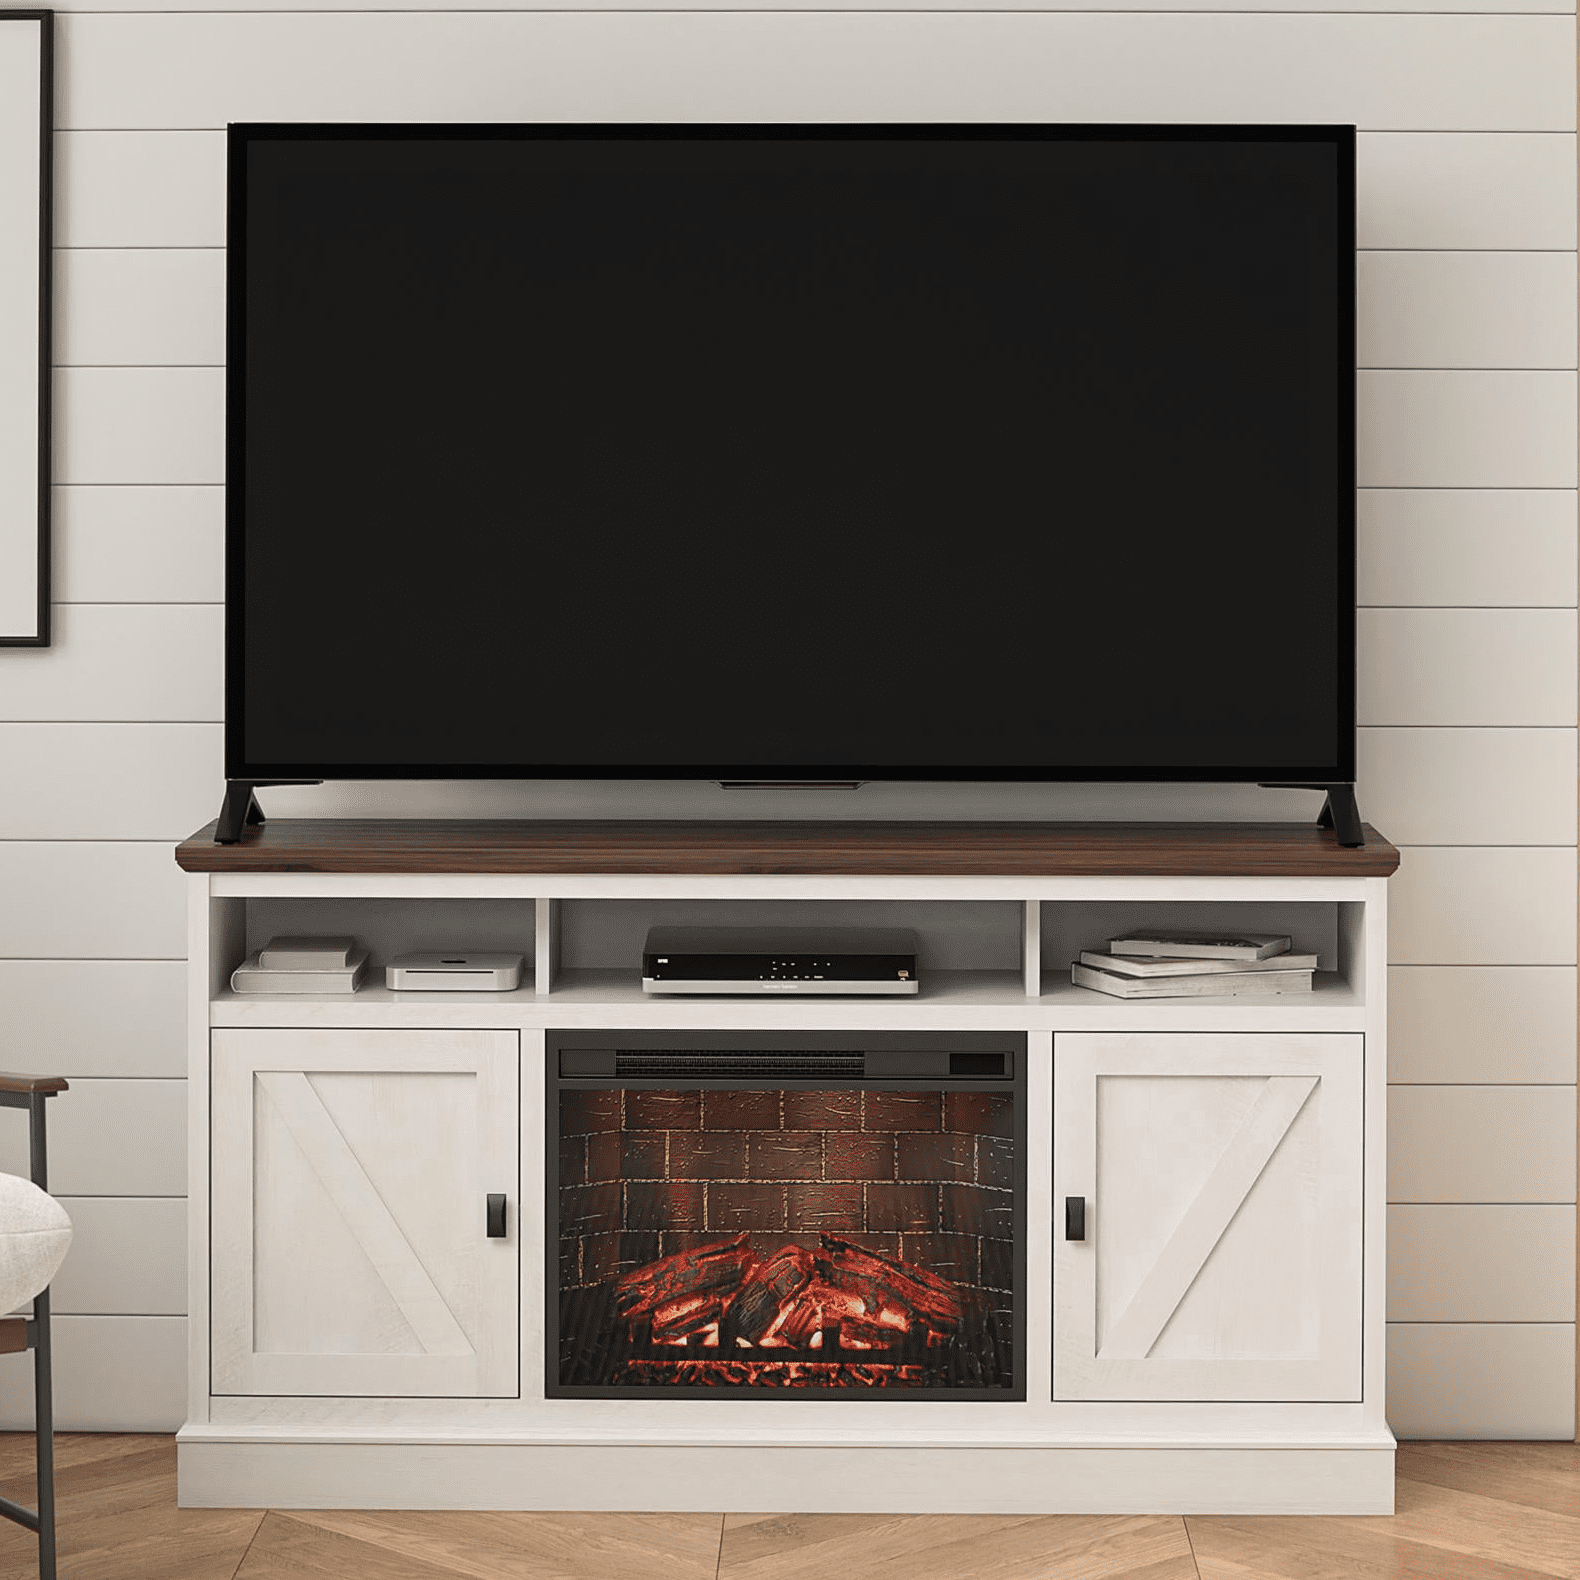 Ameriwood Home Ashton Lane Electric Fireplace TV Stand for TVs up to 65" (3 colors) $198 + Free Shipping